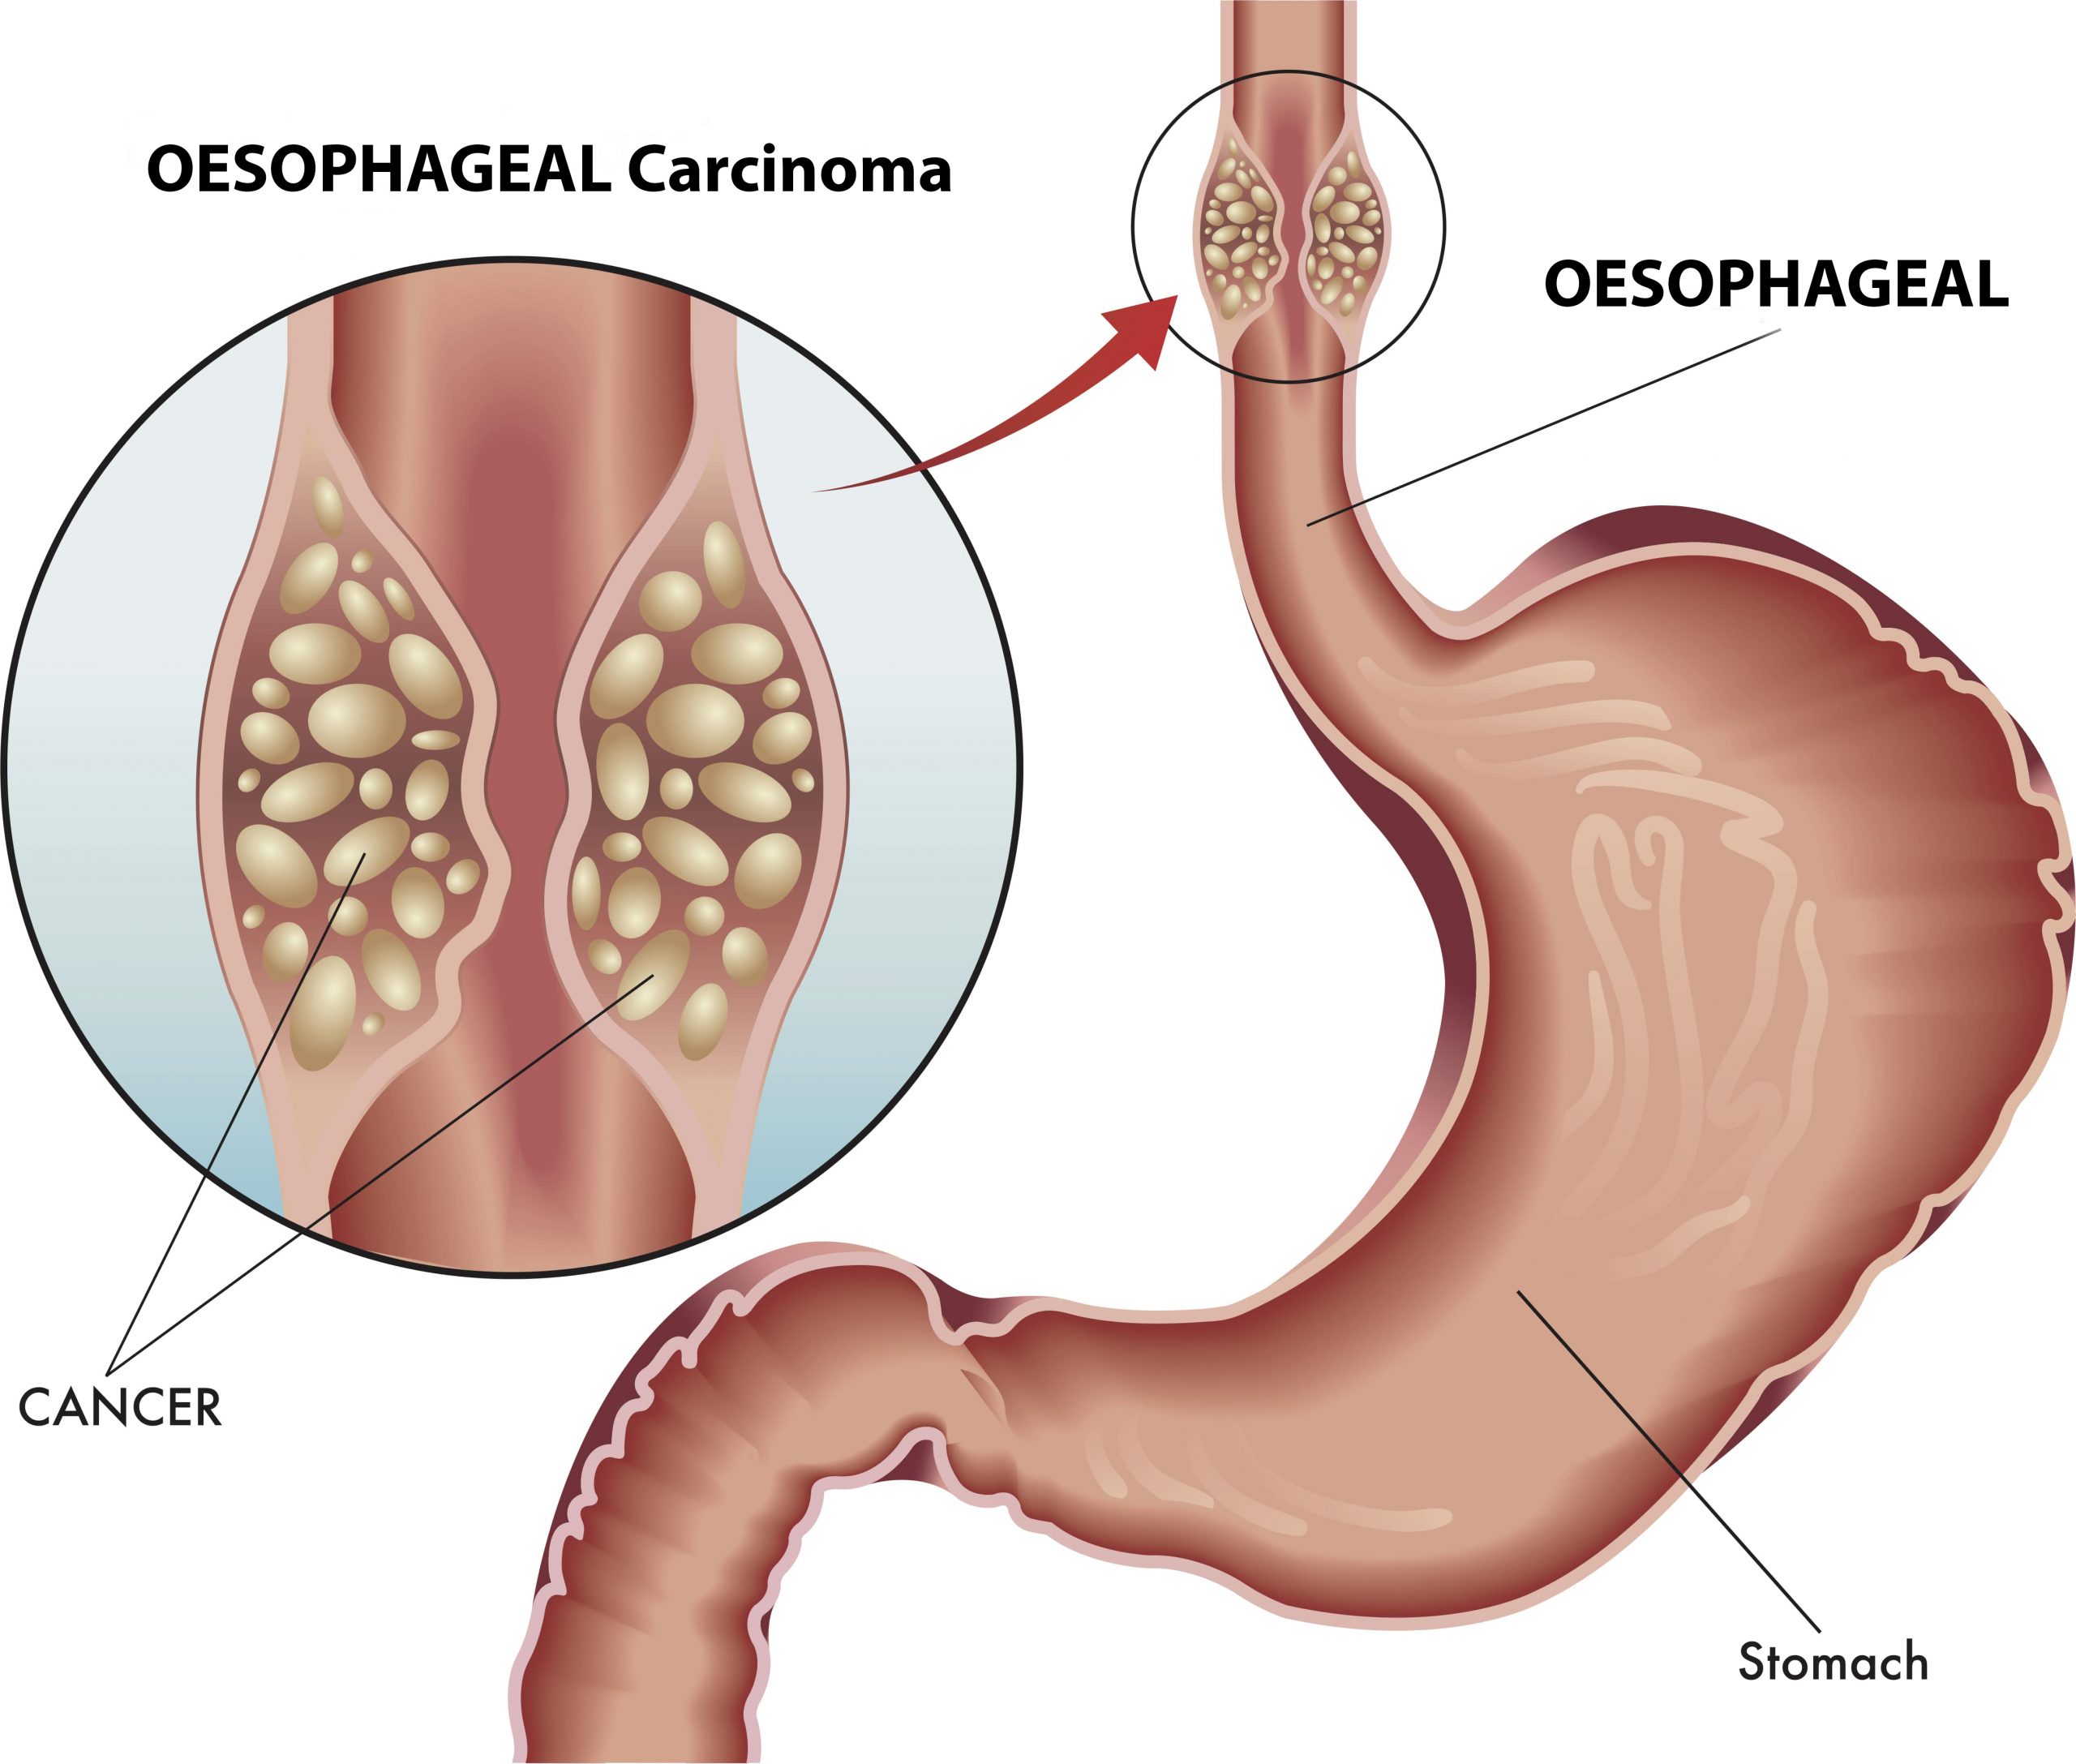 information-on-oesophagus-foodpipe-cancer